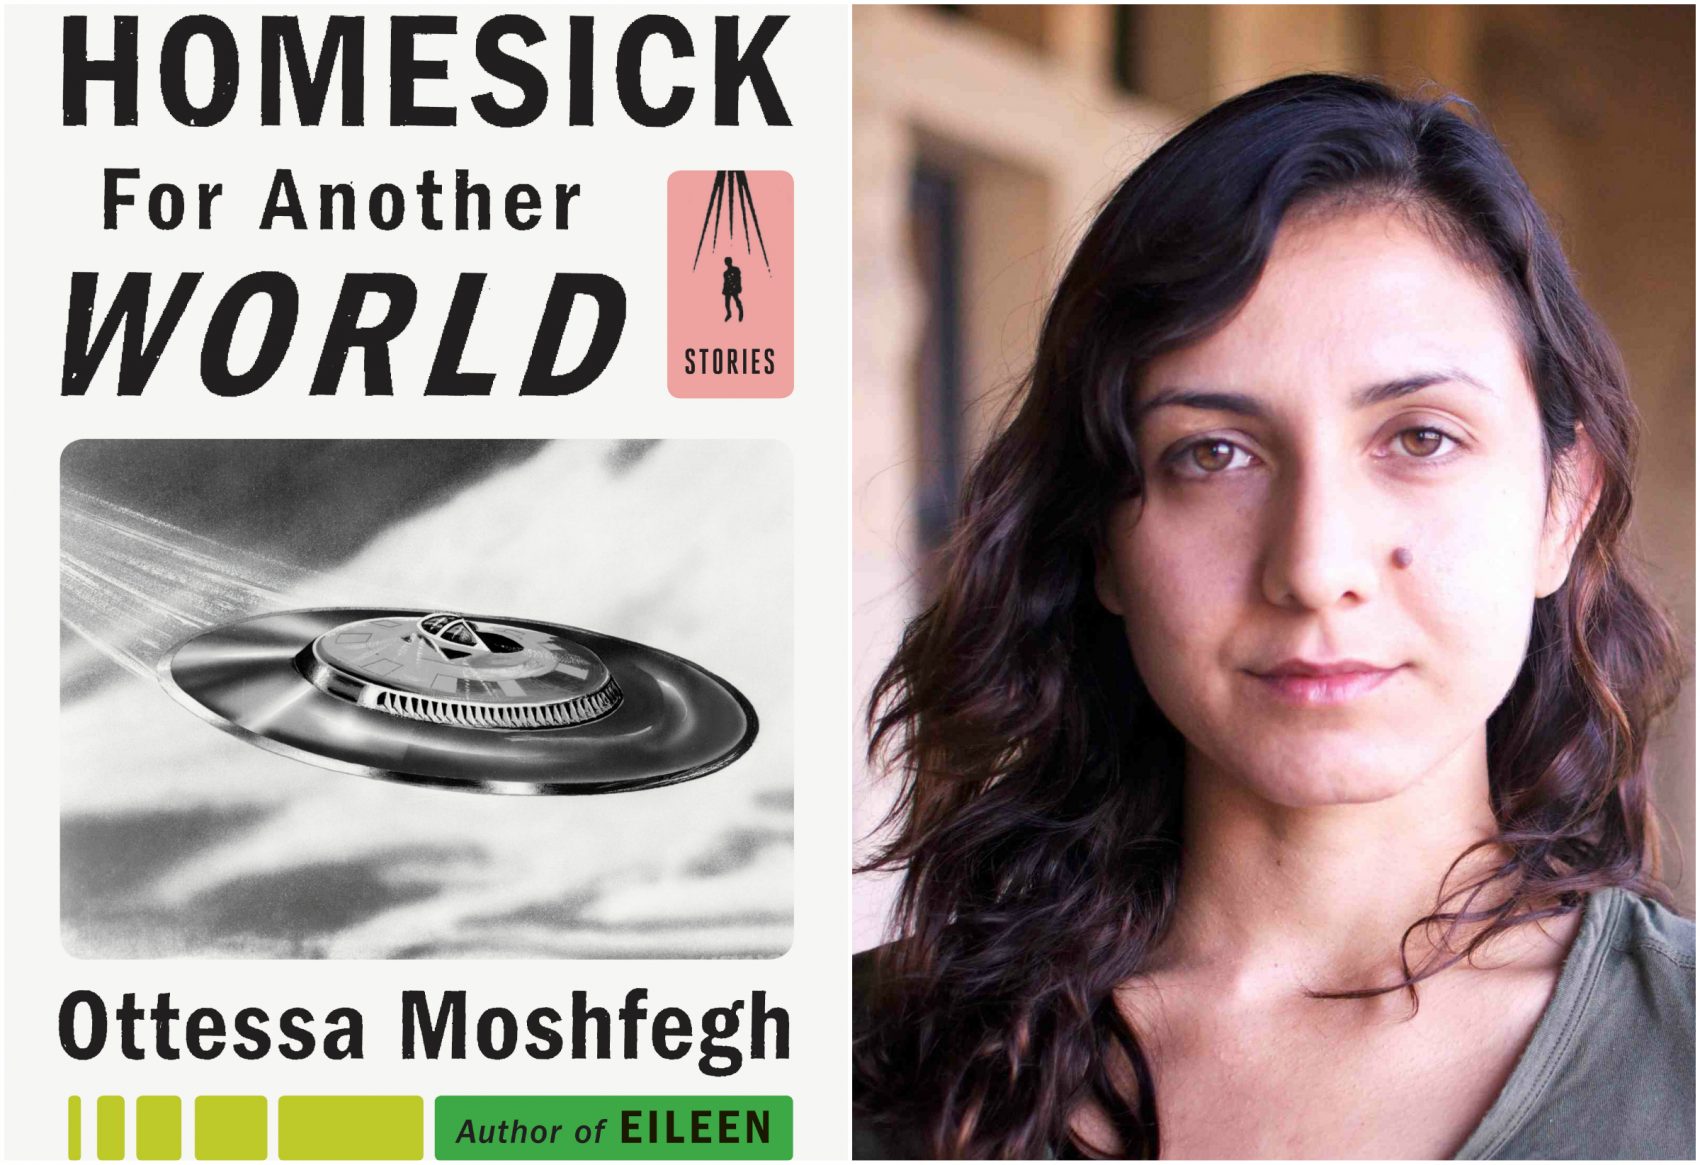 cj-affiliate-2022-womens-day-homesick-for-another-world-otessa-moshfegh